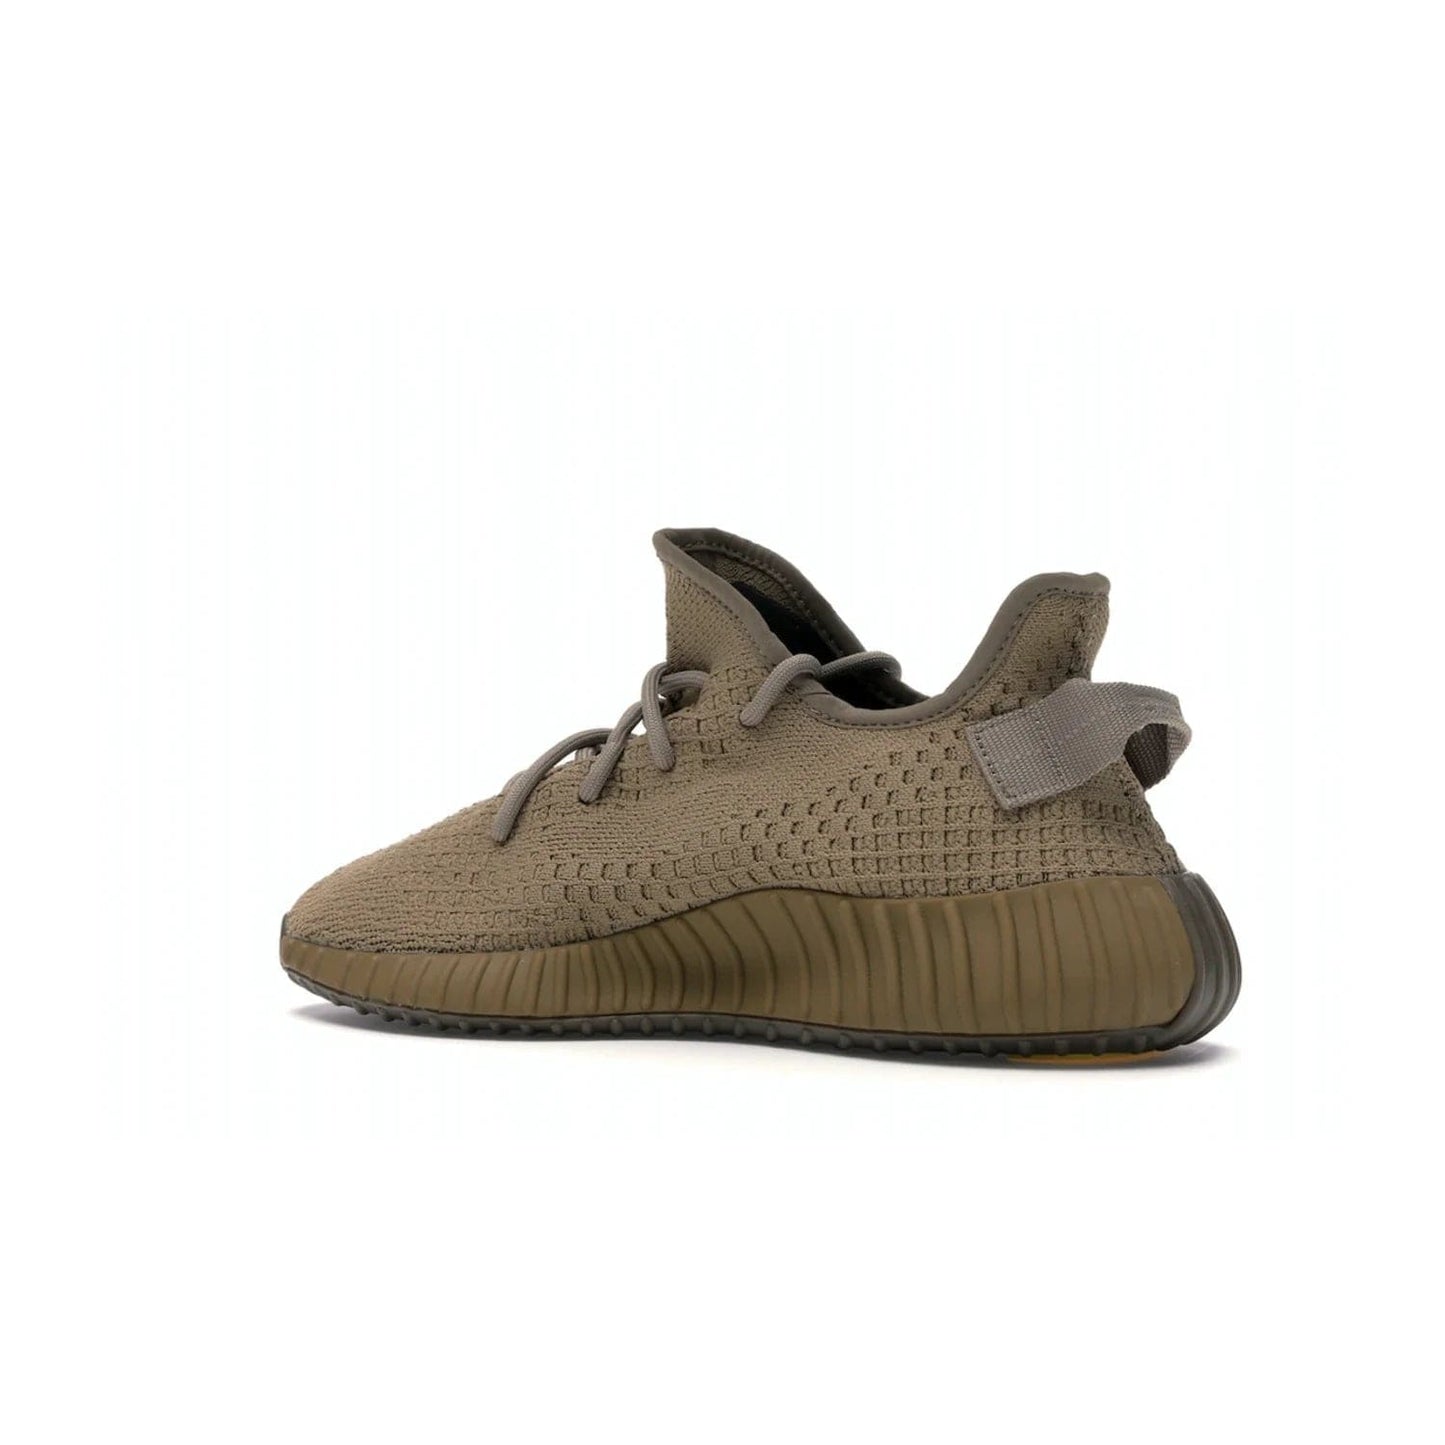 adidas Yeezy Boost 350 V2 Earth - Image 22 - Only at www.BallersClubKickz.com - Abstract style with the adidas Yeezy Boost 350 V2 Earth. Crafted with mud Primeknit upper, mud Boost and interior, and a translucent side stripe. Regional exclusive in Earth/Earth/Earth colorway, these fashionable sneakers released in February 2020. Showcase your style with the Yeezy 350 V2 Earth.